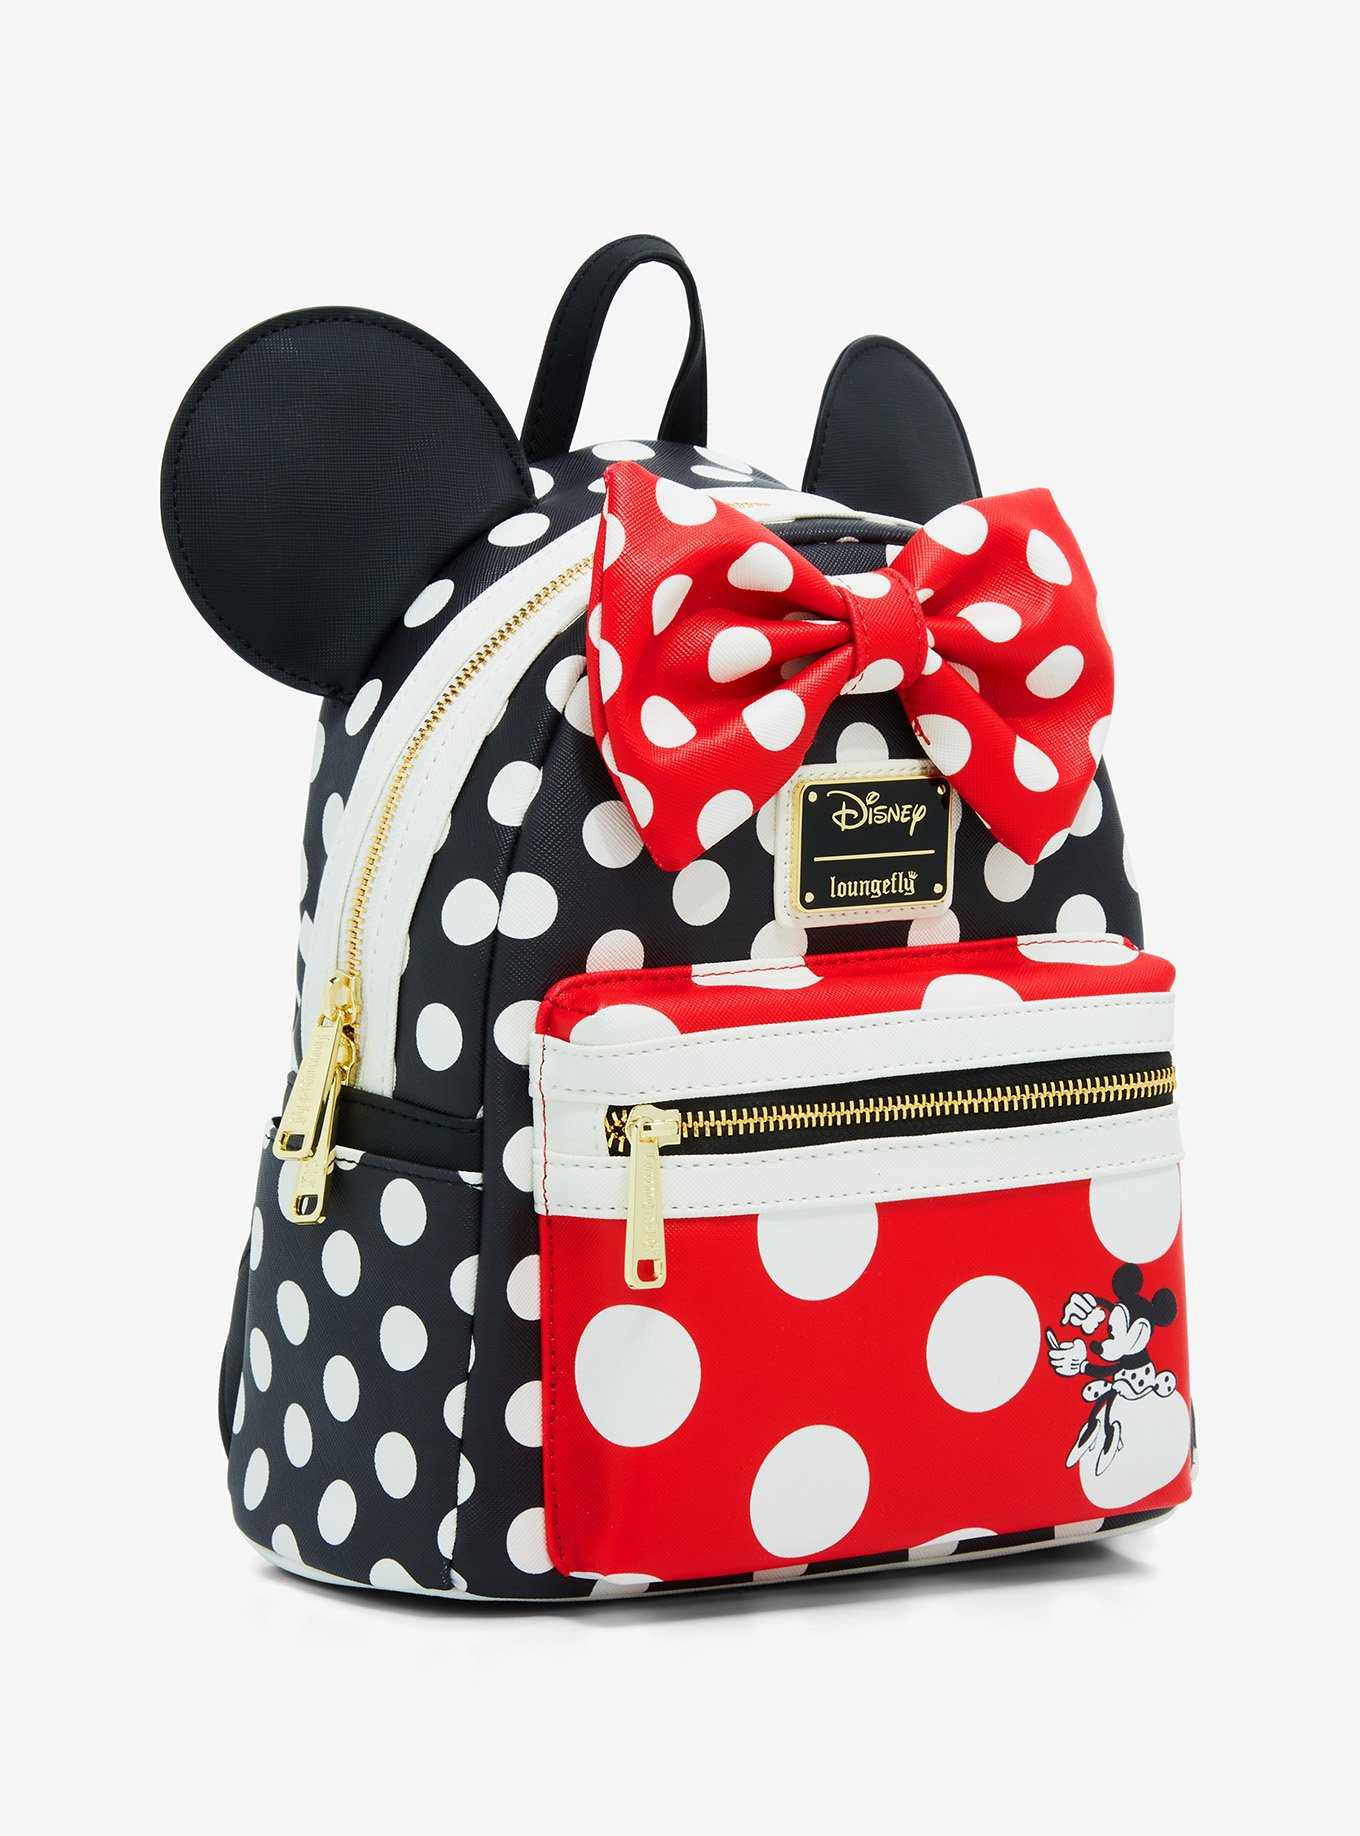 Loungefly Disney Minnie Mouse Black and Red Polka Dot Mini Backpack, , hi-res